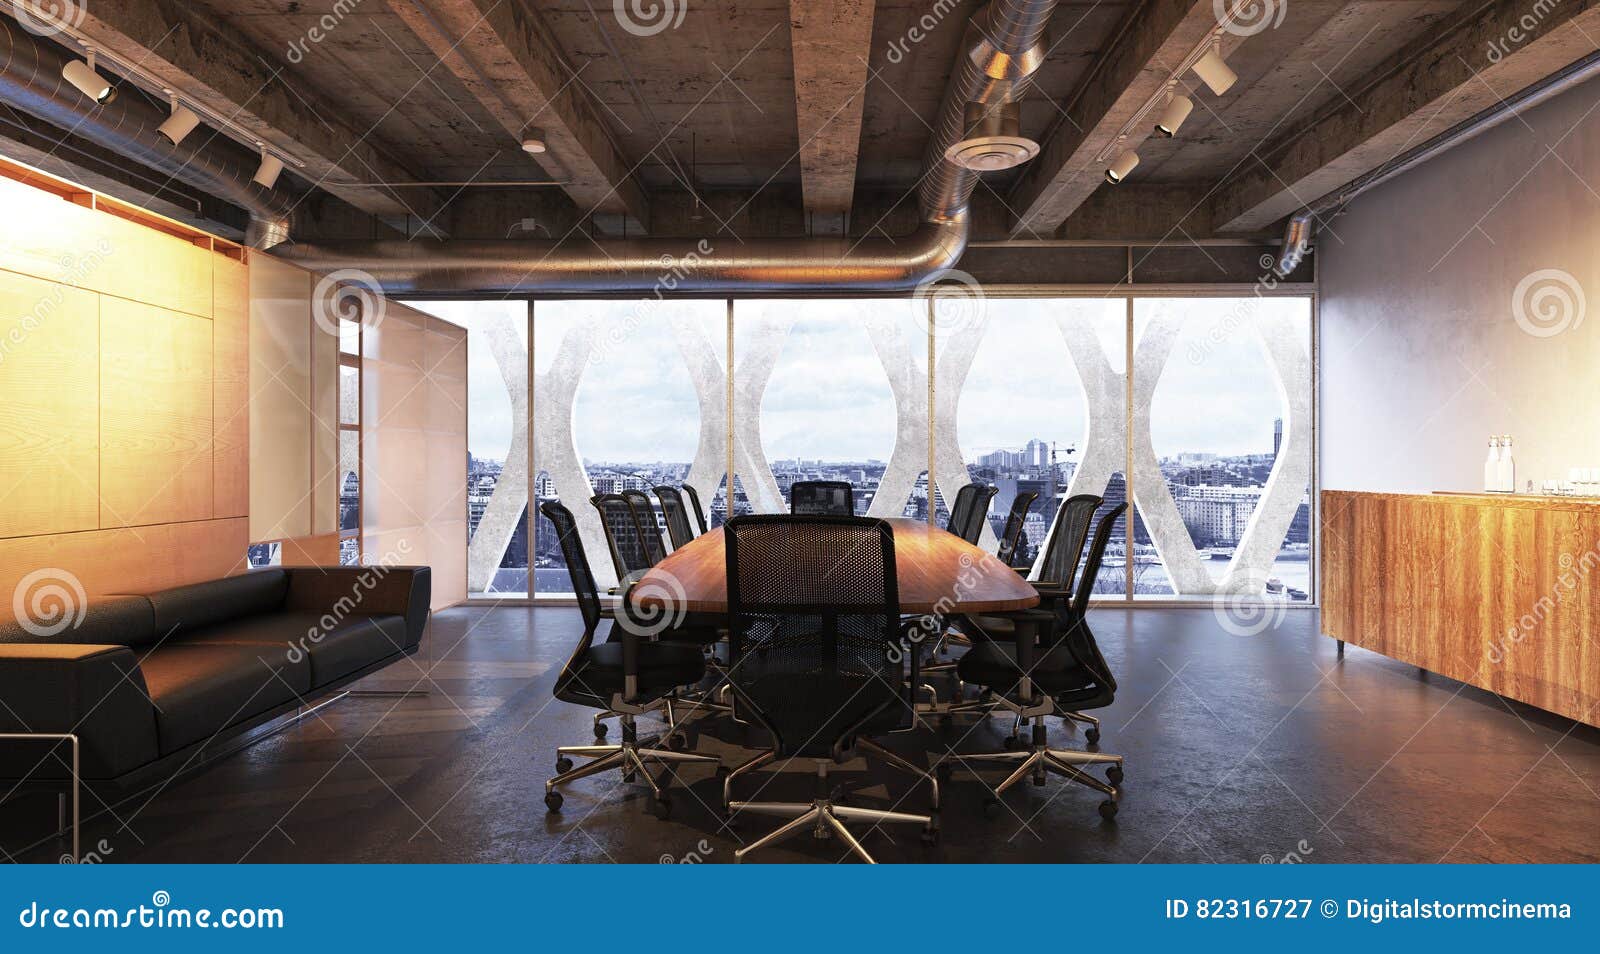 executive modern empty business high rise office conference room overlooking a city with industrial accents